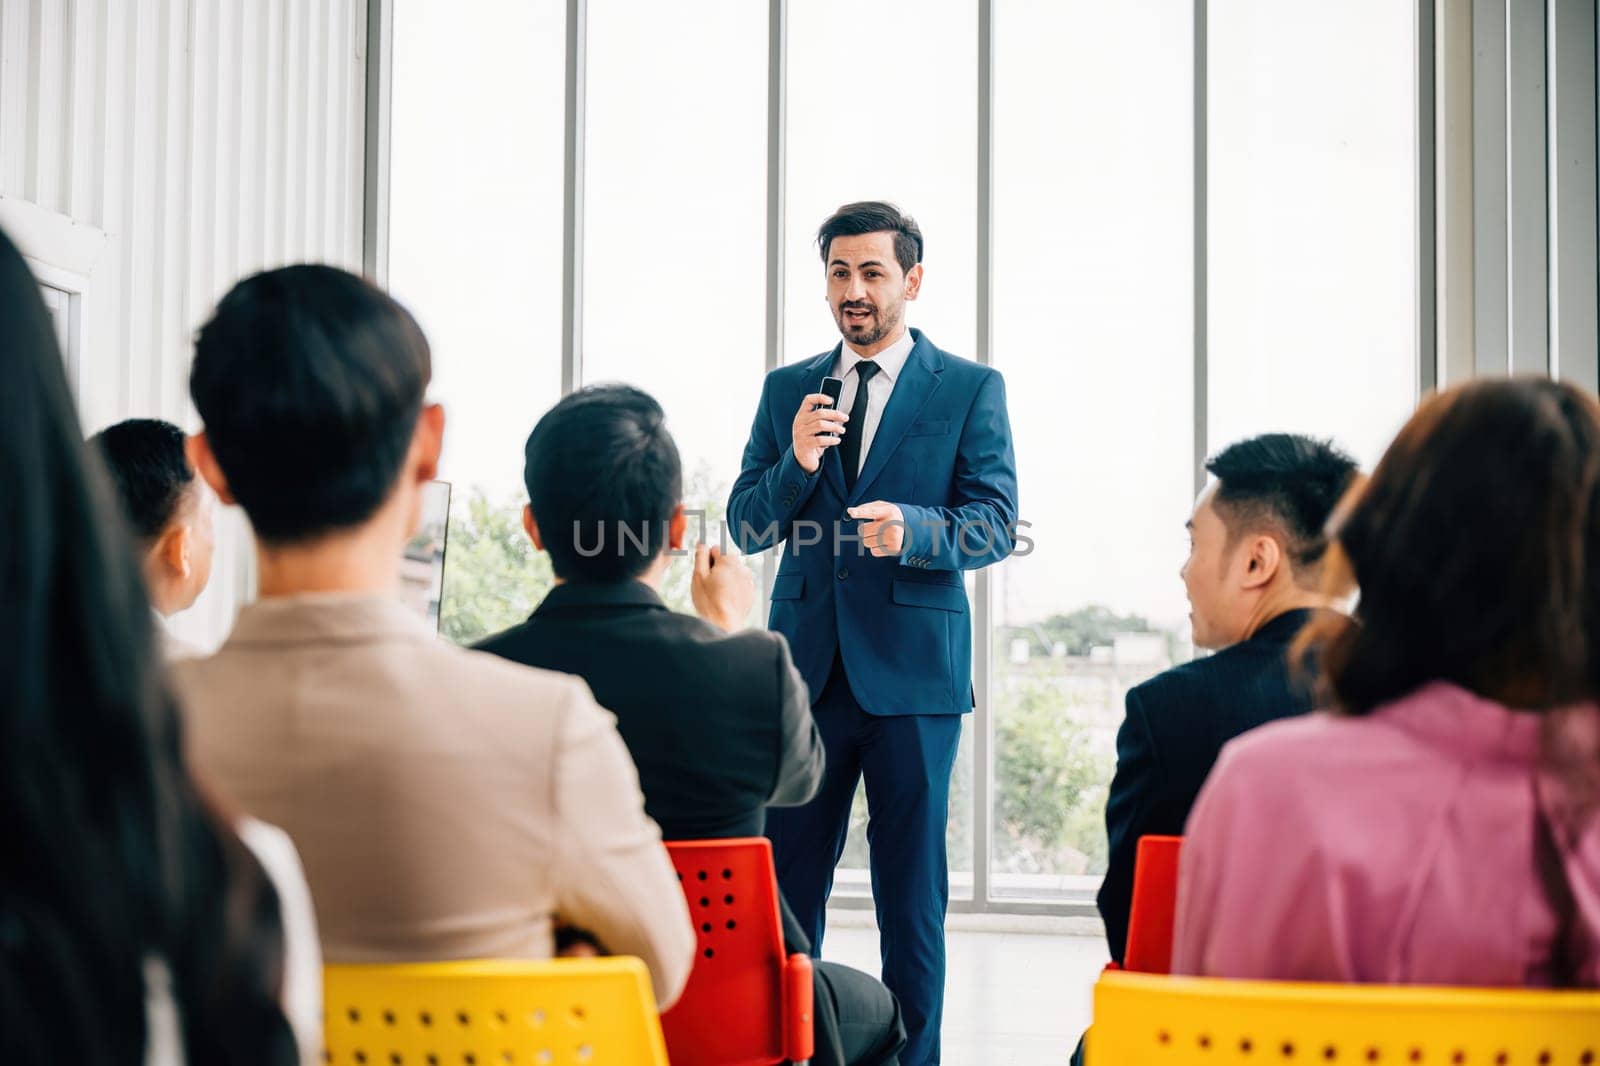 In a meeting room business professionals along with a diverse audience of colleagues sit and attentively listen as leaders present reviews. symbolizes importance of teamwork and collaborative success.